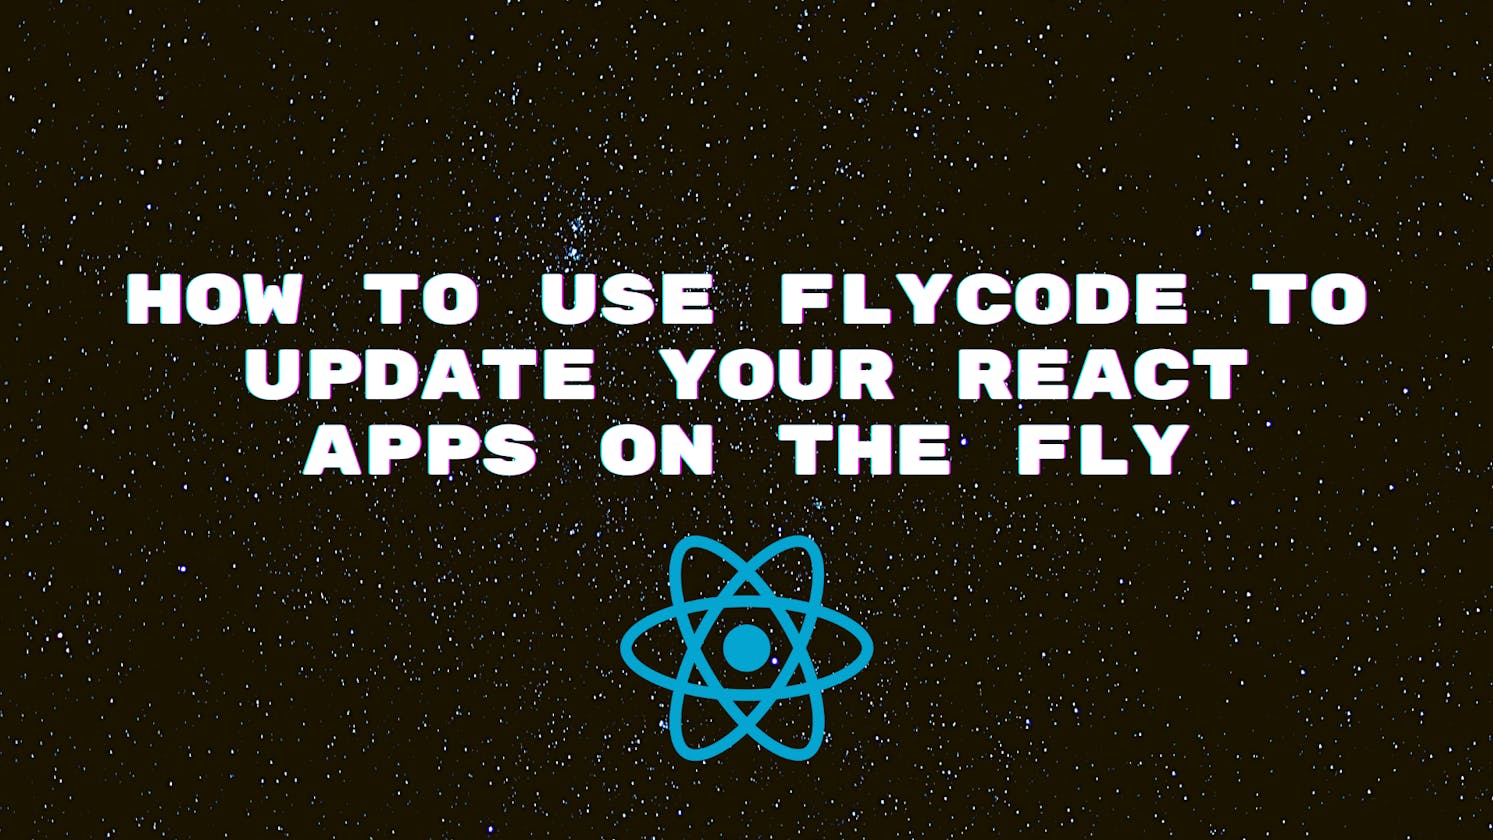 How to use FlyCode to update your React apps on the fly